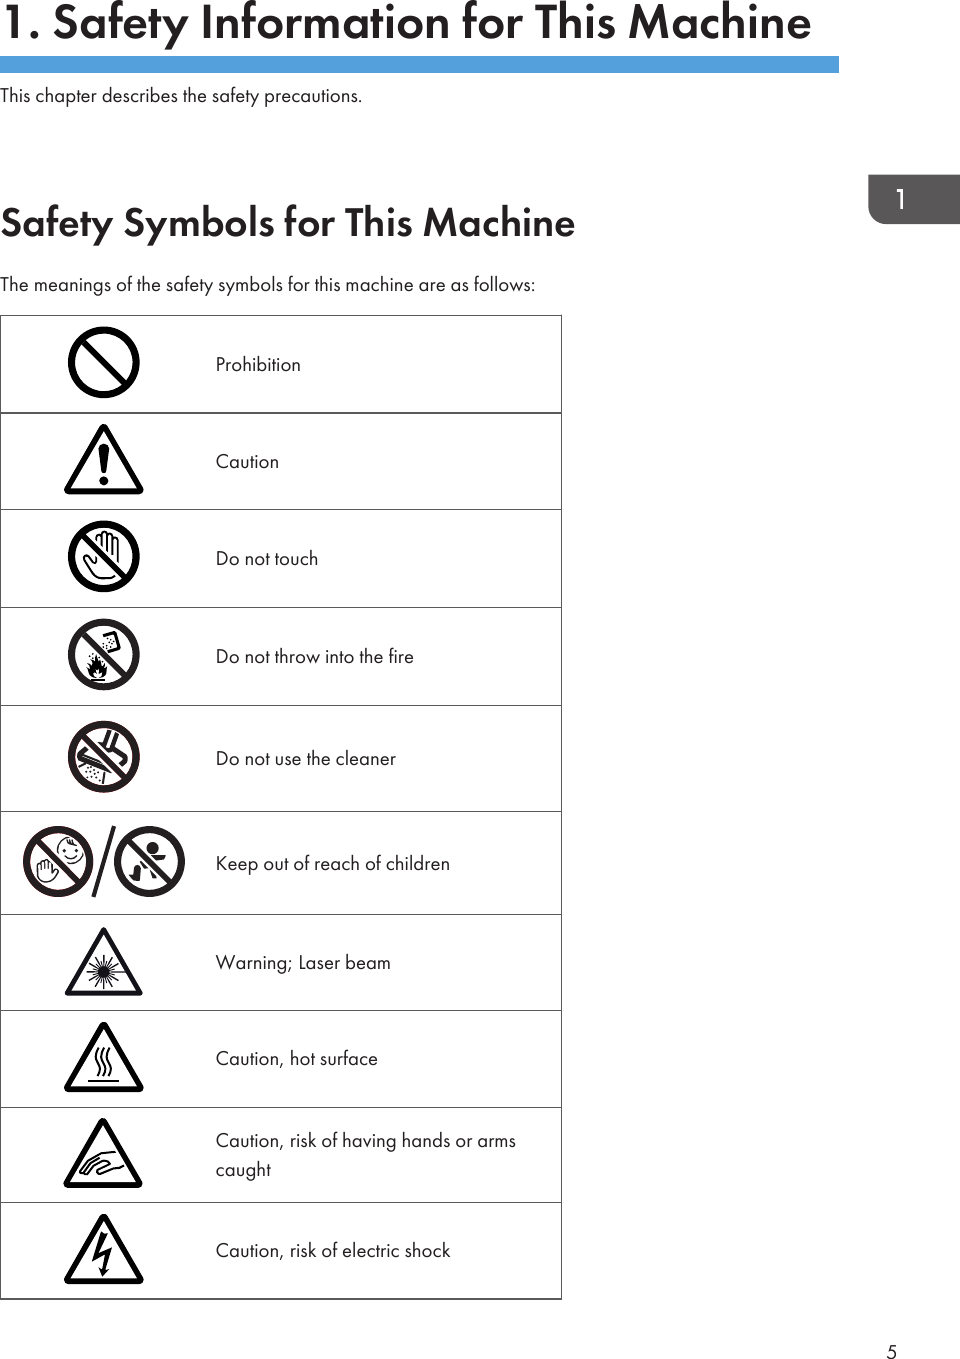 1. Safety Information for This MachineThis chapter describes the safety precautions.Safety Symbols for This MachineThe meanings of the safety symbols for this machine are as follows:ProhibitionCautionDo not touchDo not throw into the fireDo not use the cleanerKeep out of reach of childrenWarning; Laser beamCaution, hot surfaceCaution, risk of having hands or arms caughtCaution, risk of electric shock5